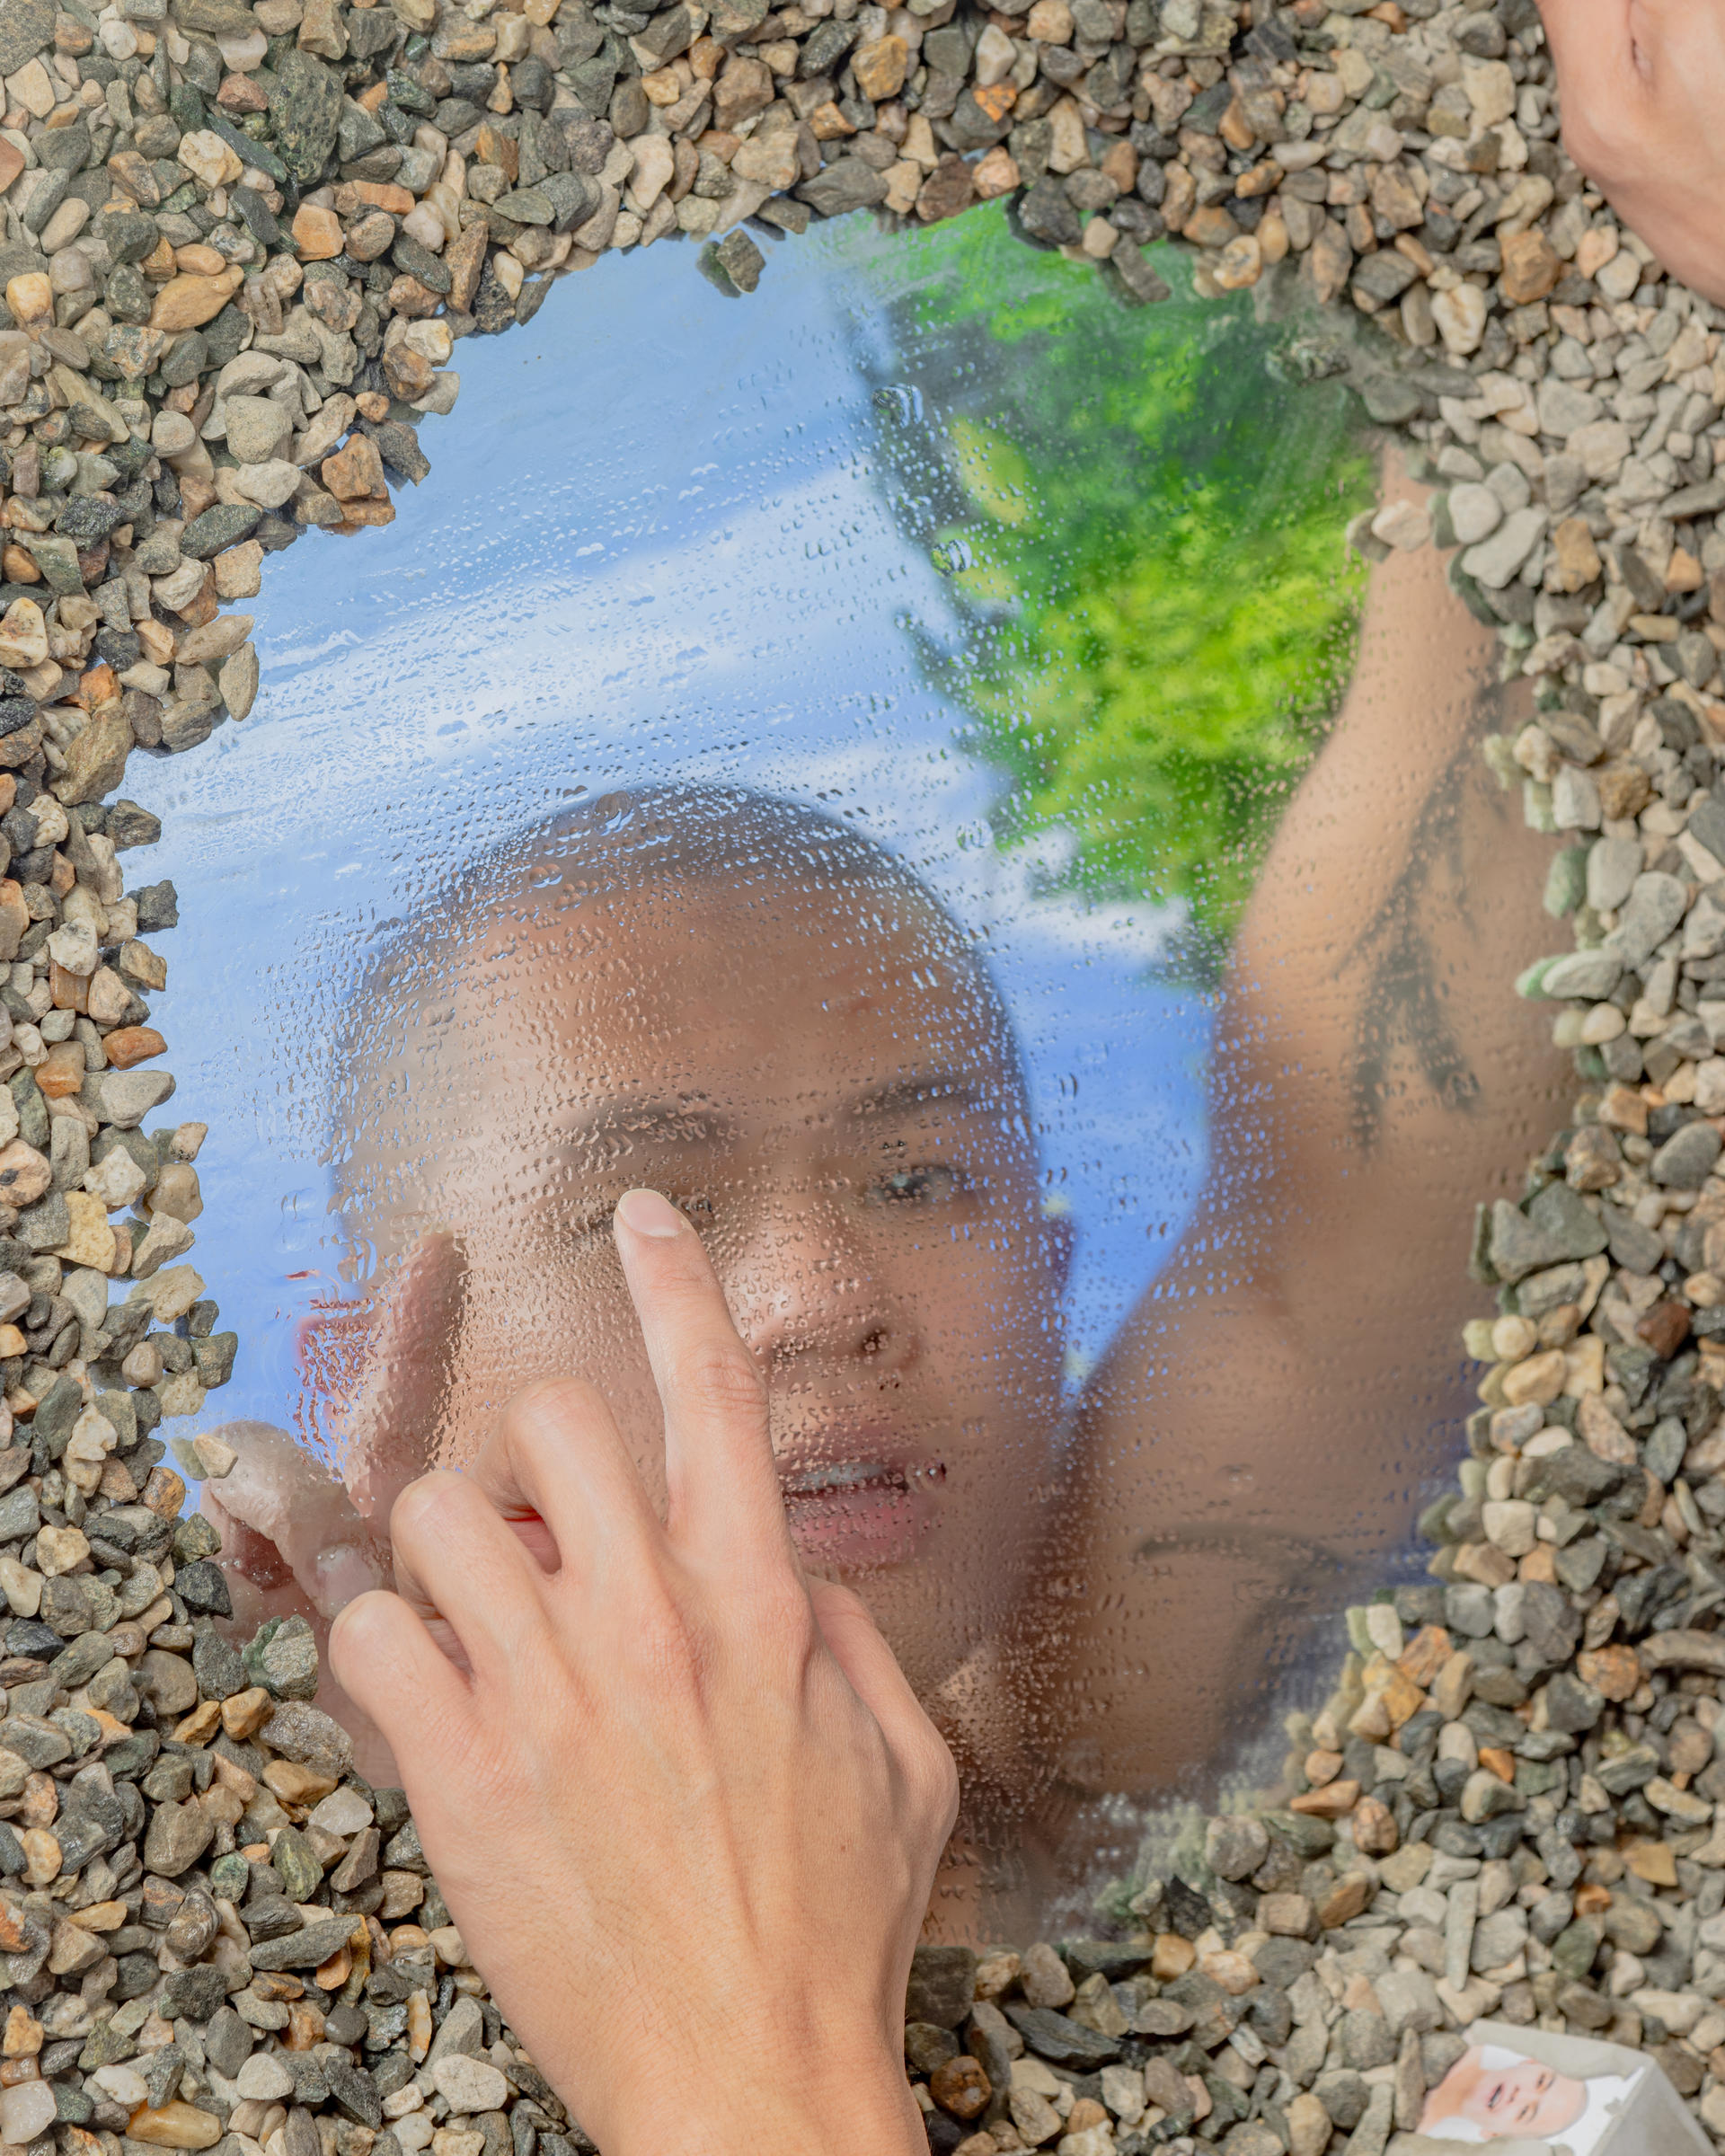 A man is touching a circular pool showing his reflection, the pool is surrounded by gravel.